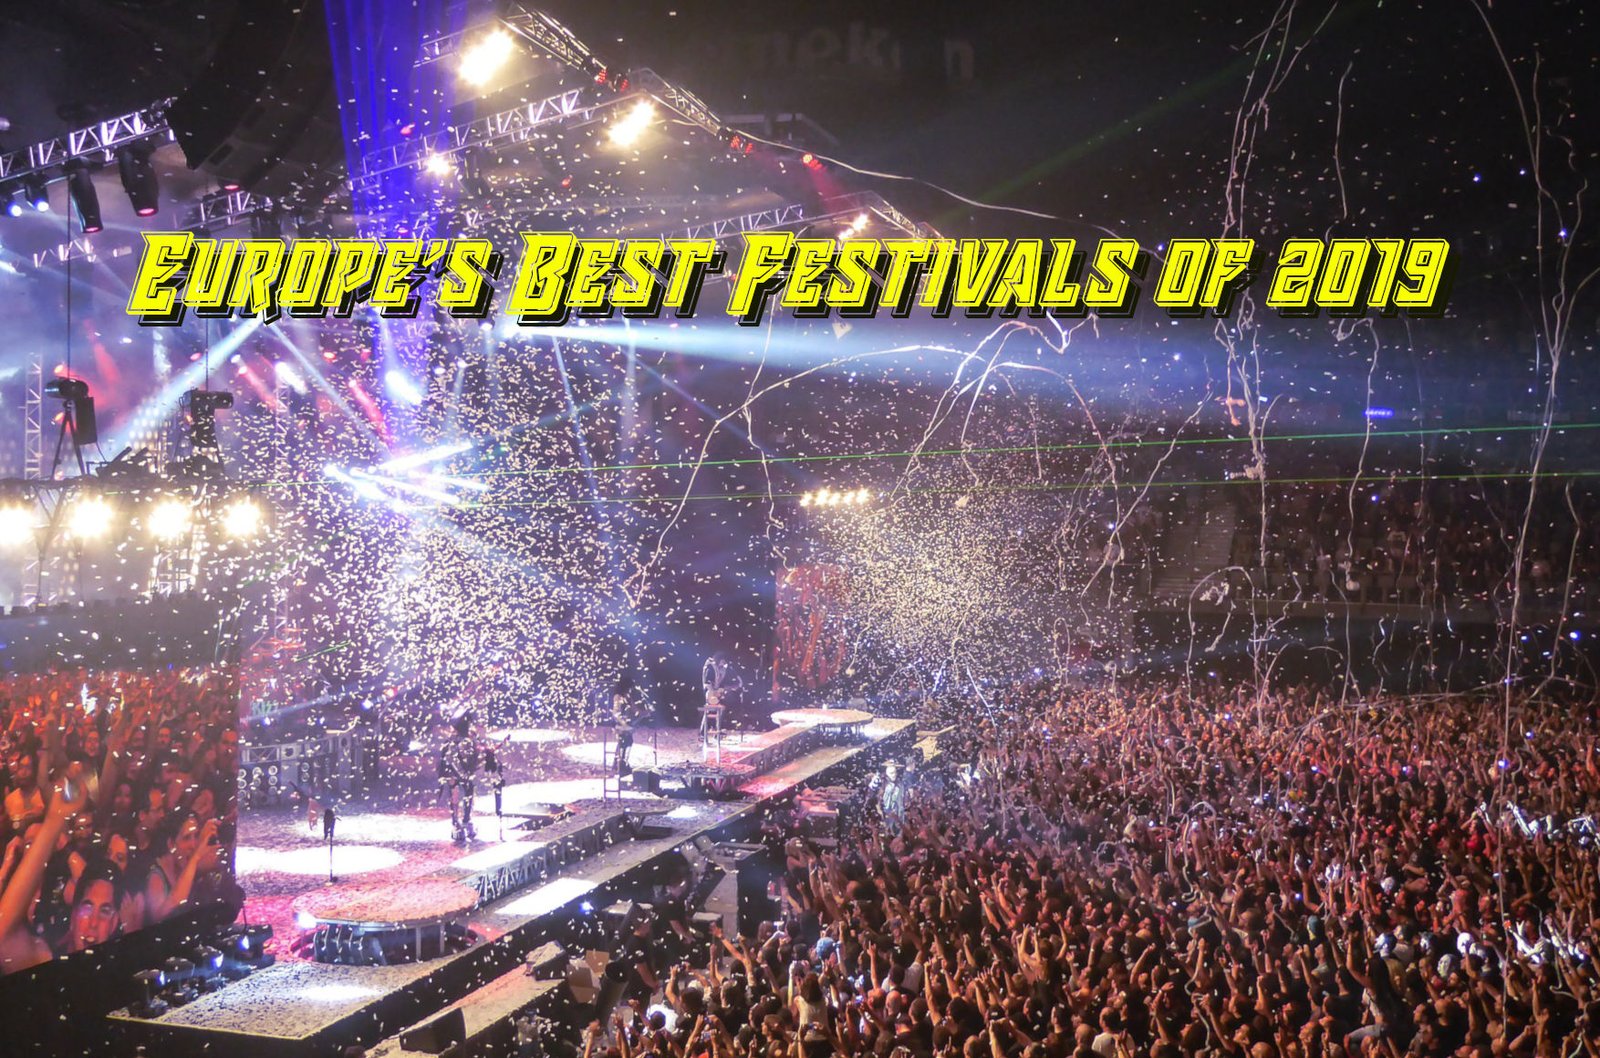 photo illustration for article about europe's best music festivals of 2019